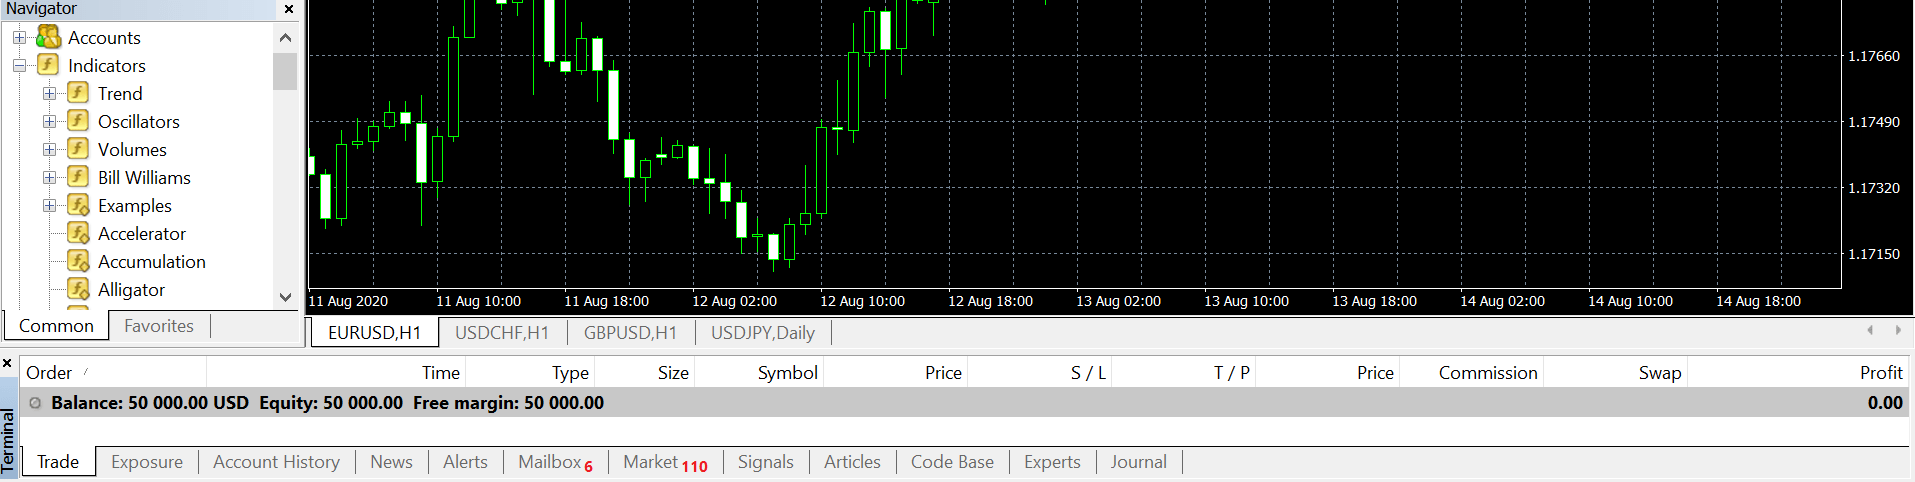 tradingplatforms-metatrader4-whatismt4-and-howtouseit-trade-tab-image